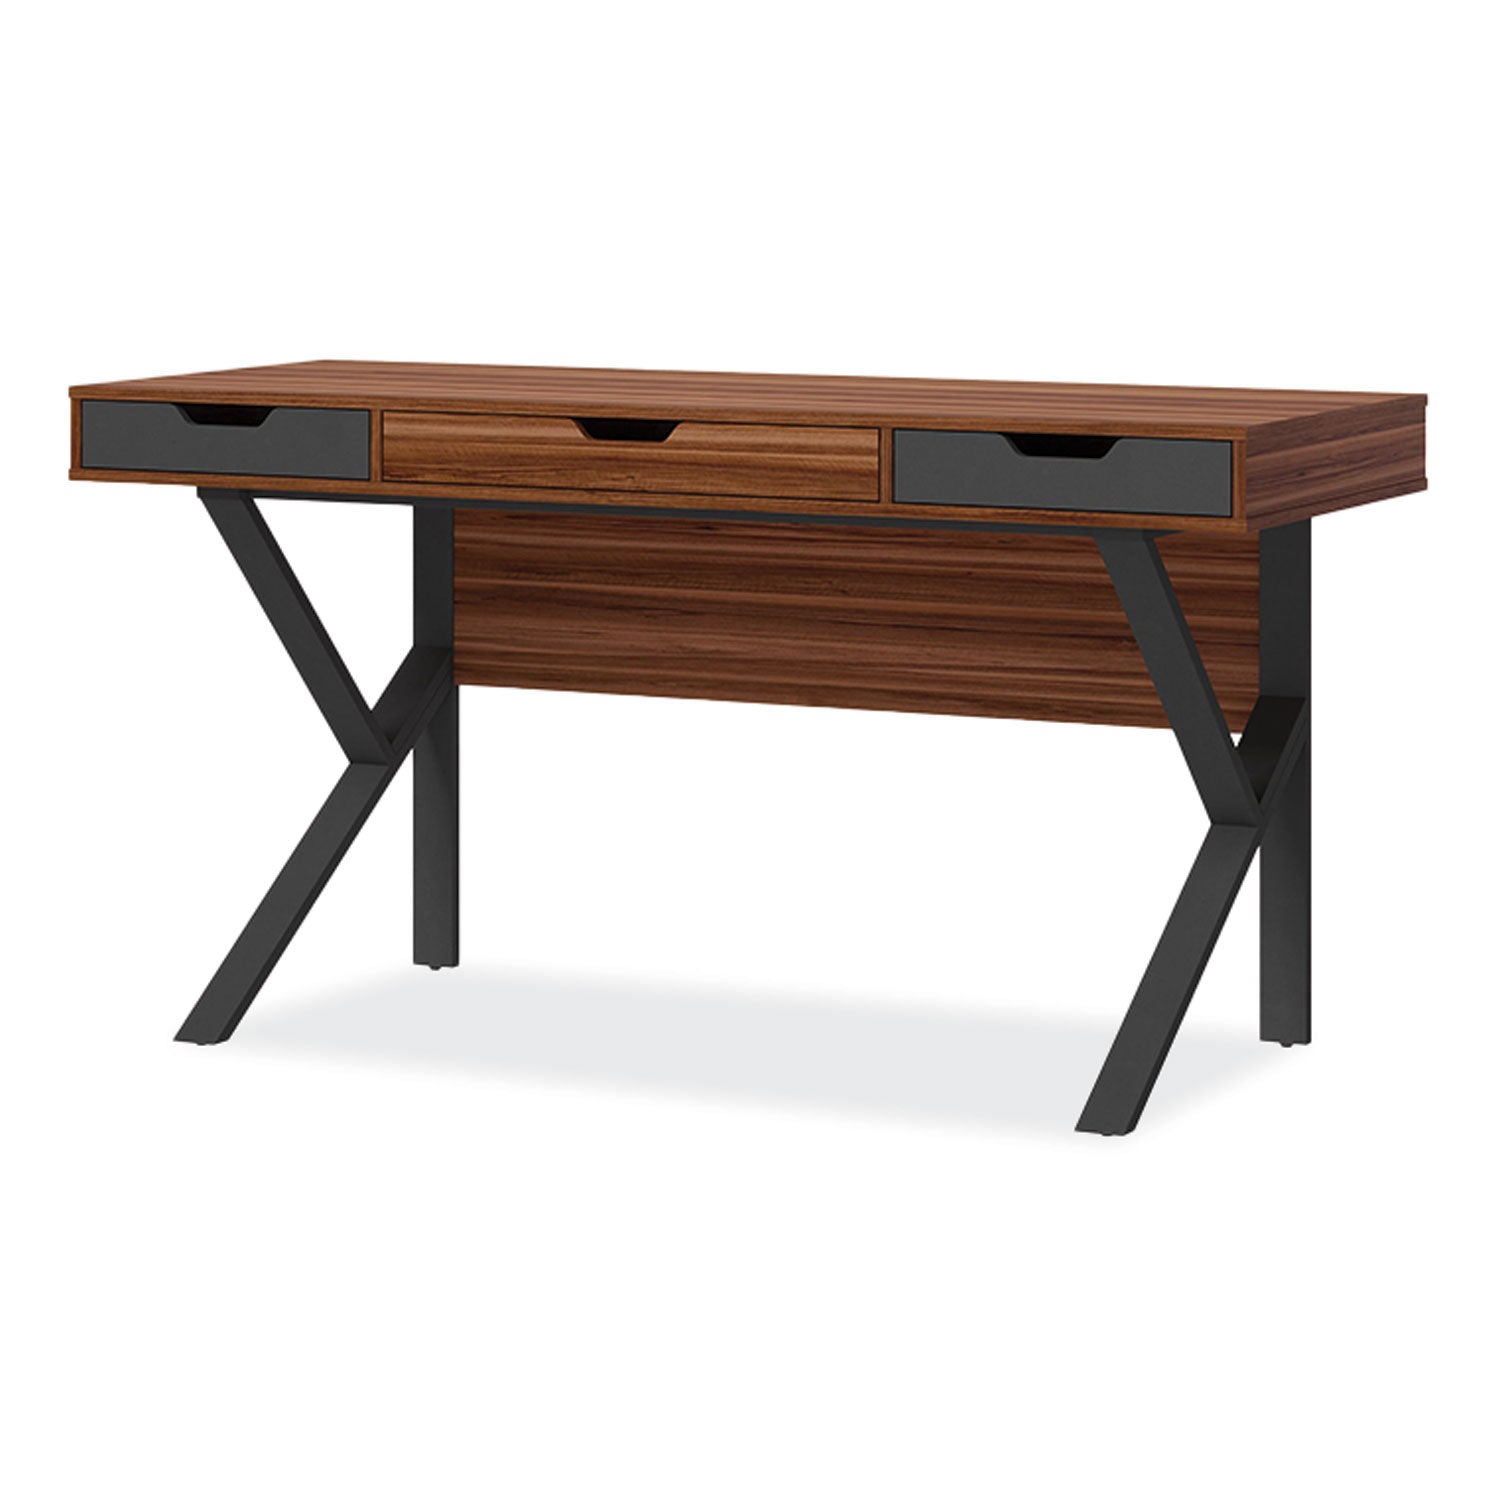 stirling-table-desk-5975-x-2375-x-31-natural-walnut-charcoal-gray_whlst60d - 3